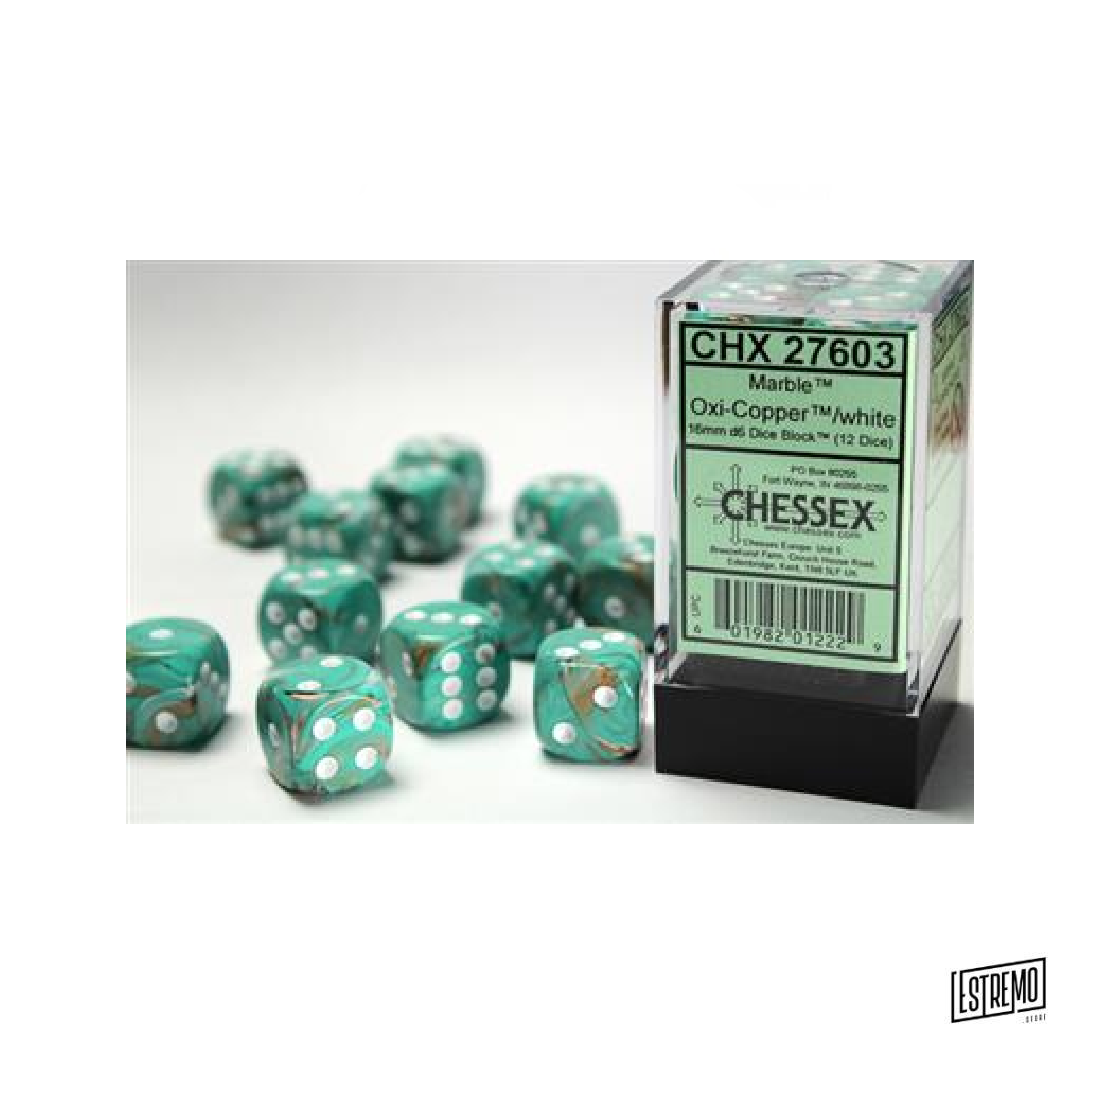 CHESSEX 16MM D6 WITH PIPS DICE BLOCKS (12 DICE) - MARBLE OXI‑COPPER/WHITE